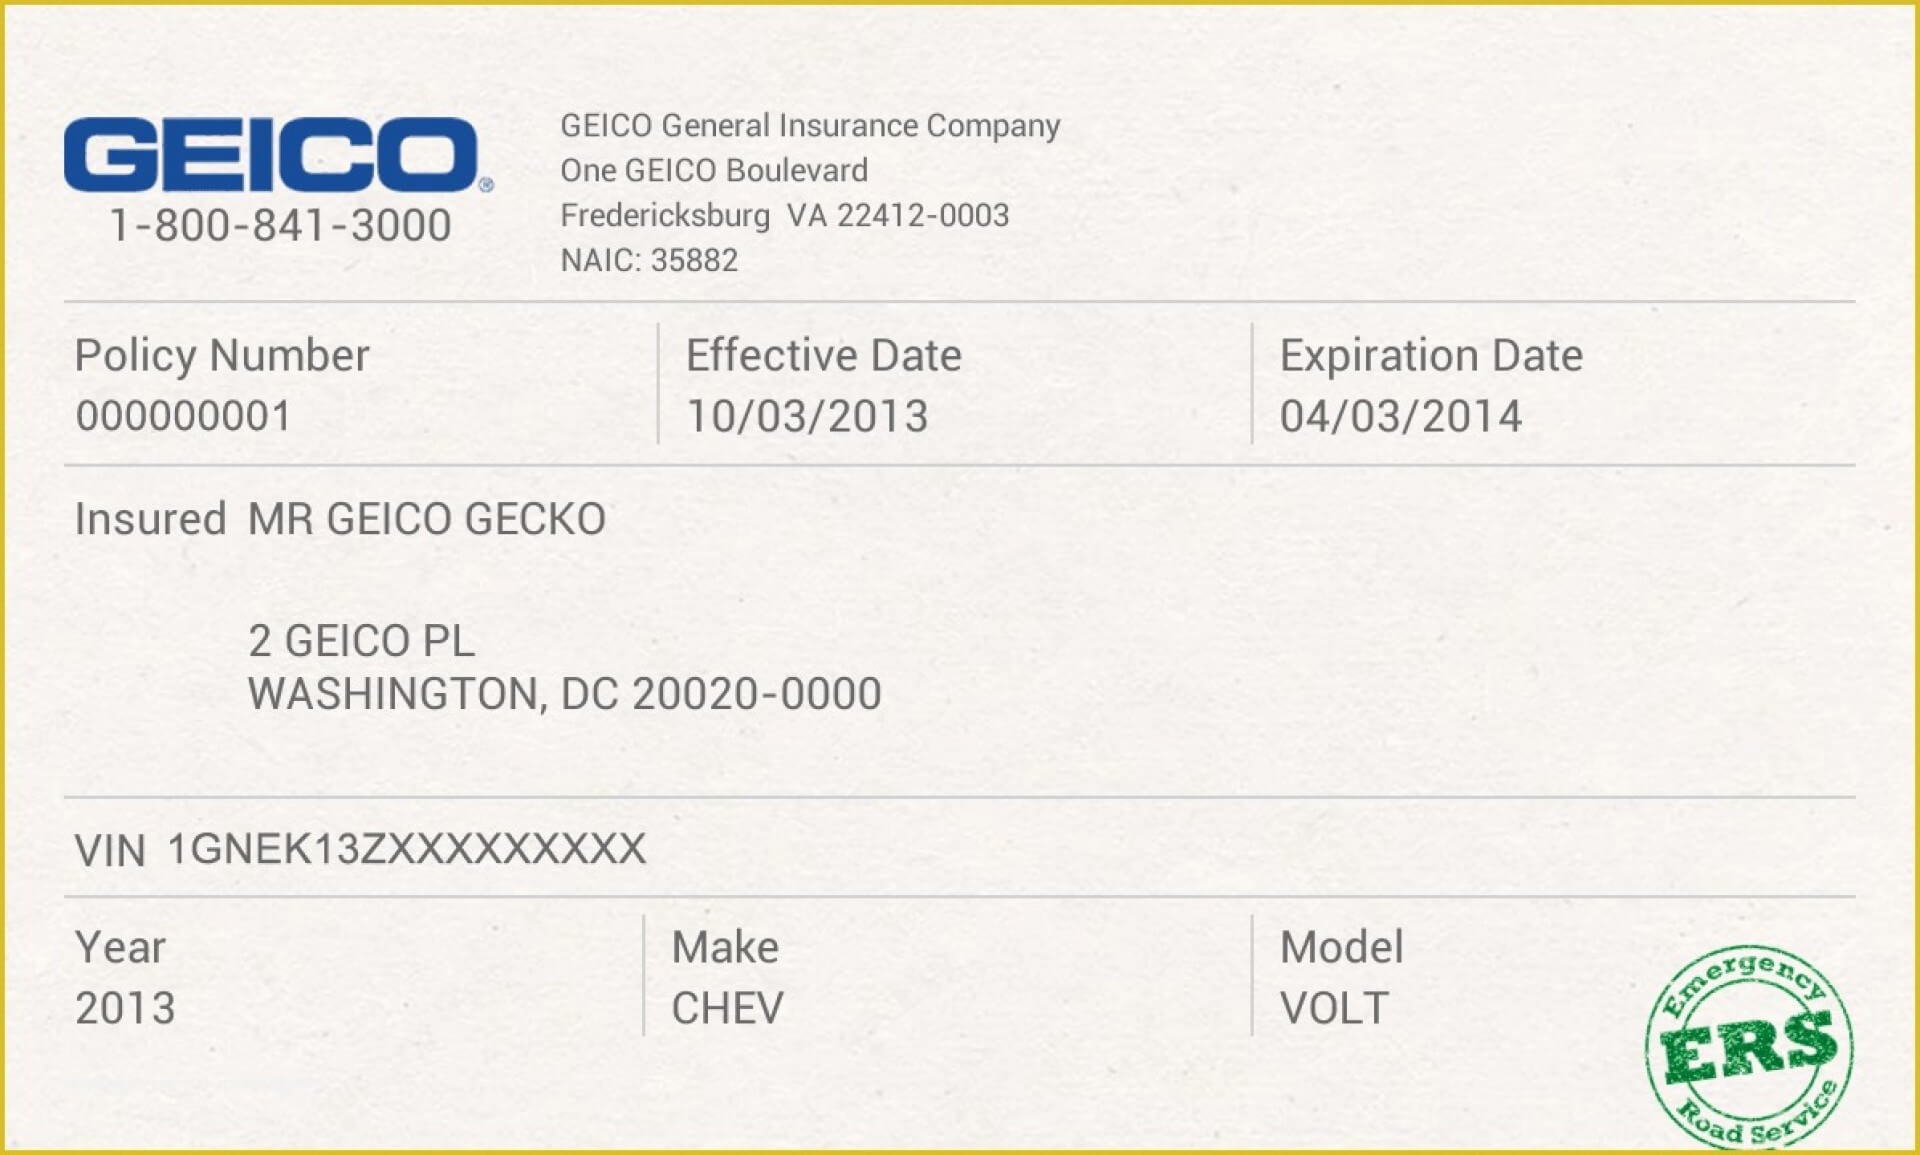 012 Company Car Policy Template Free Auto Insurance Id Card Within Auto Insurance Card Template Free Download